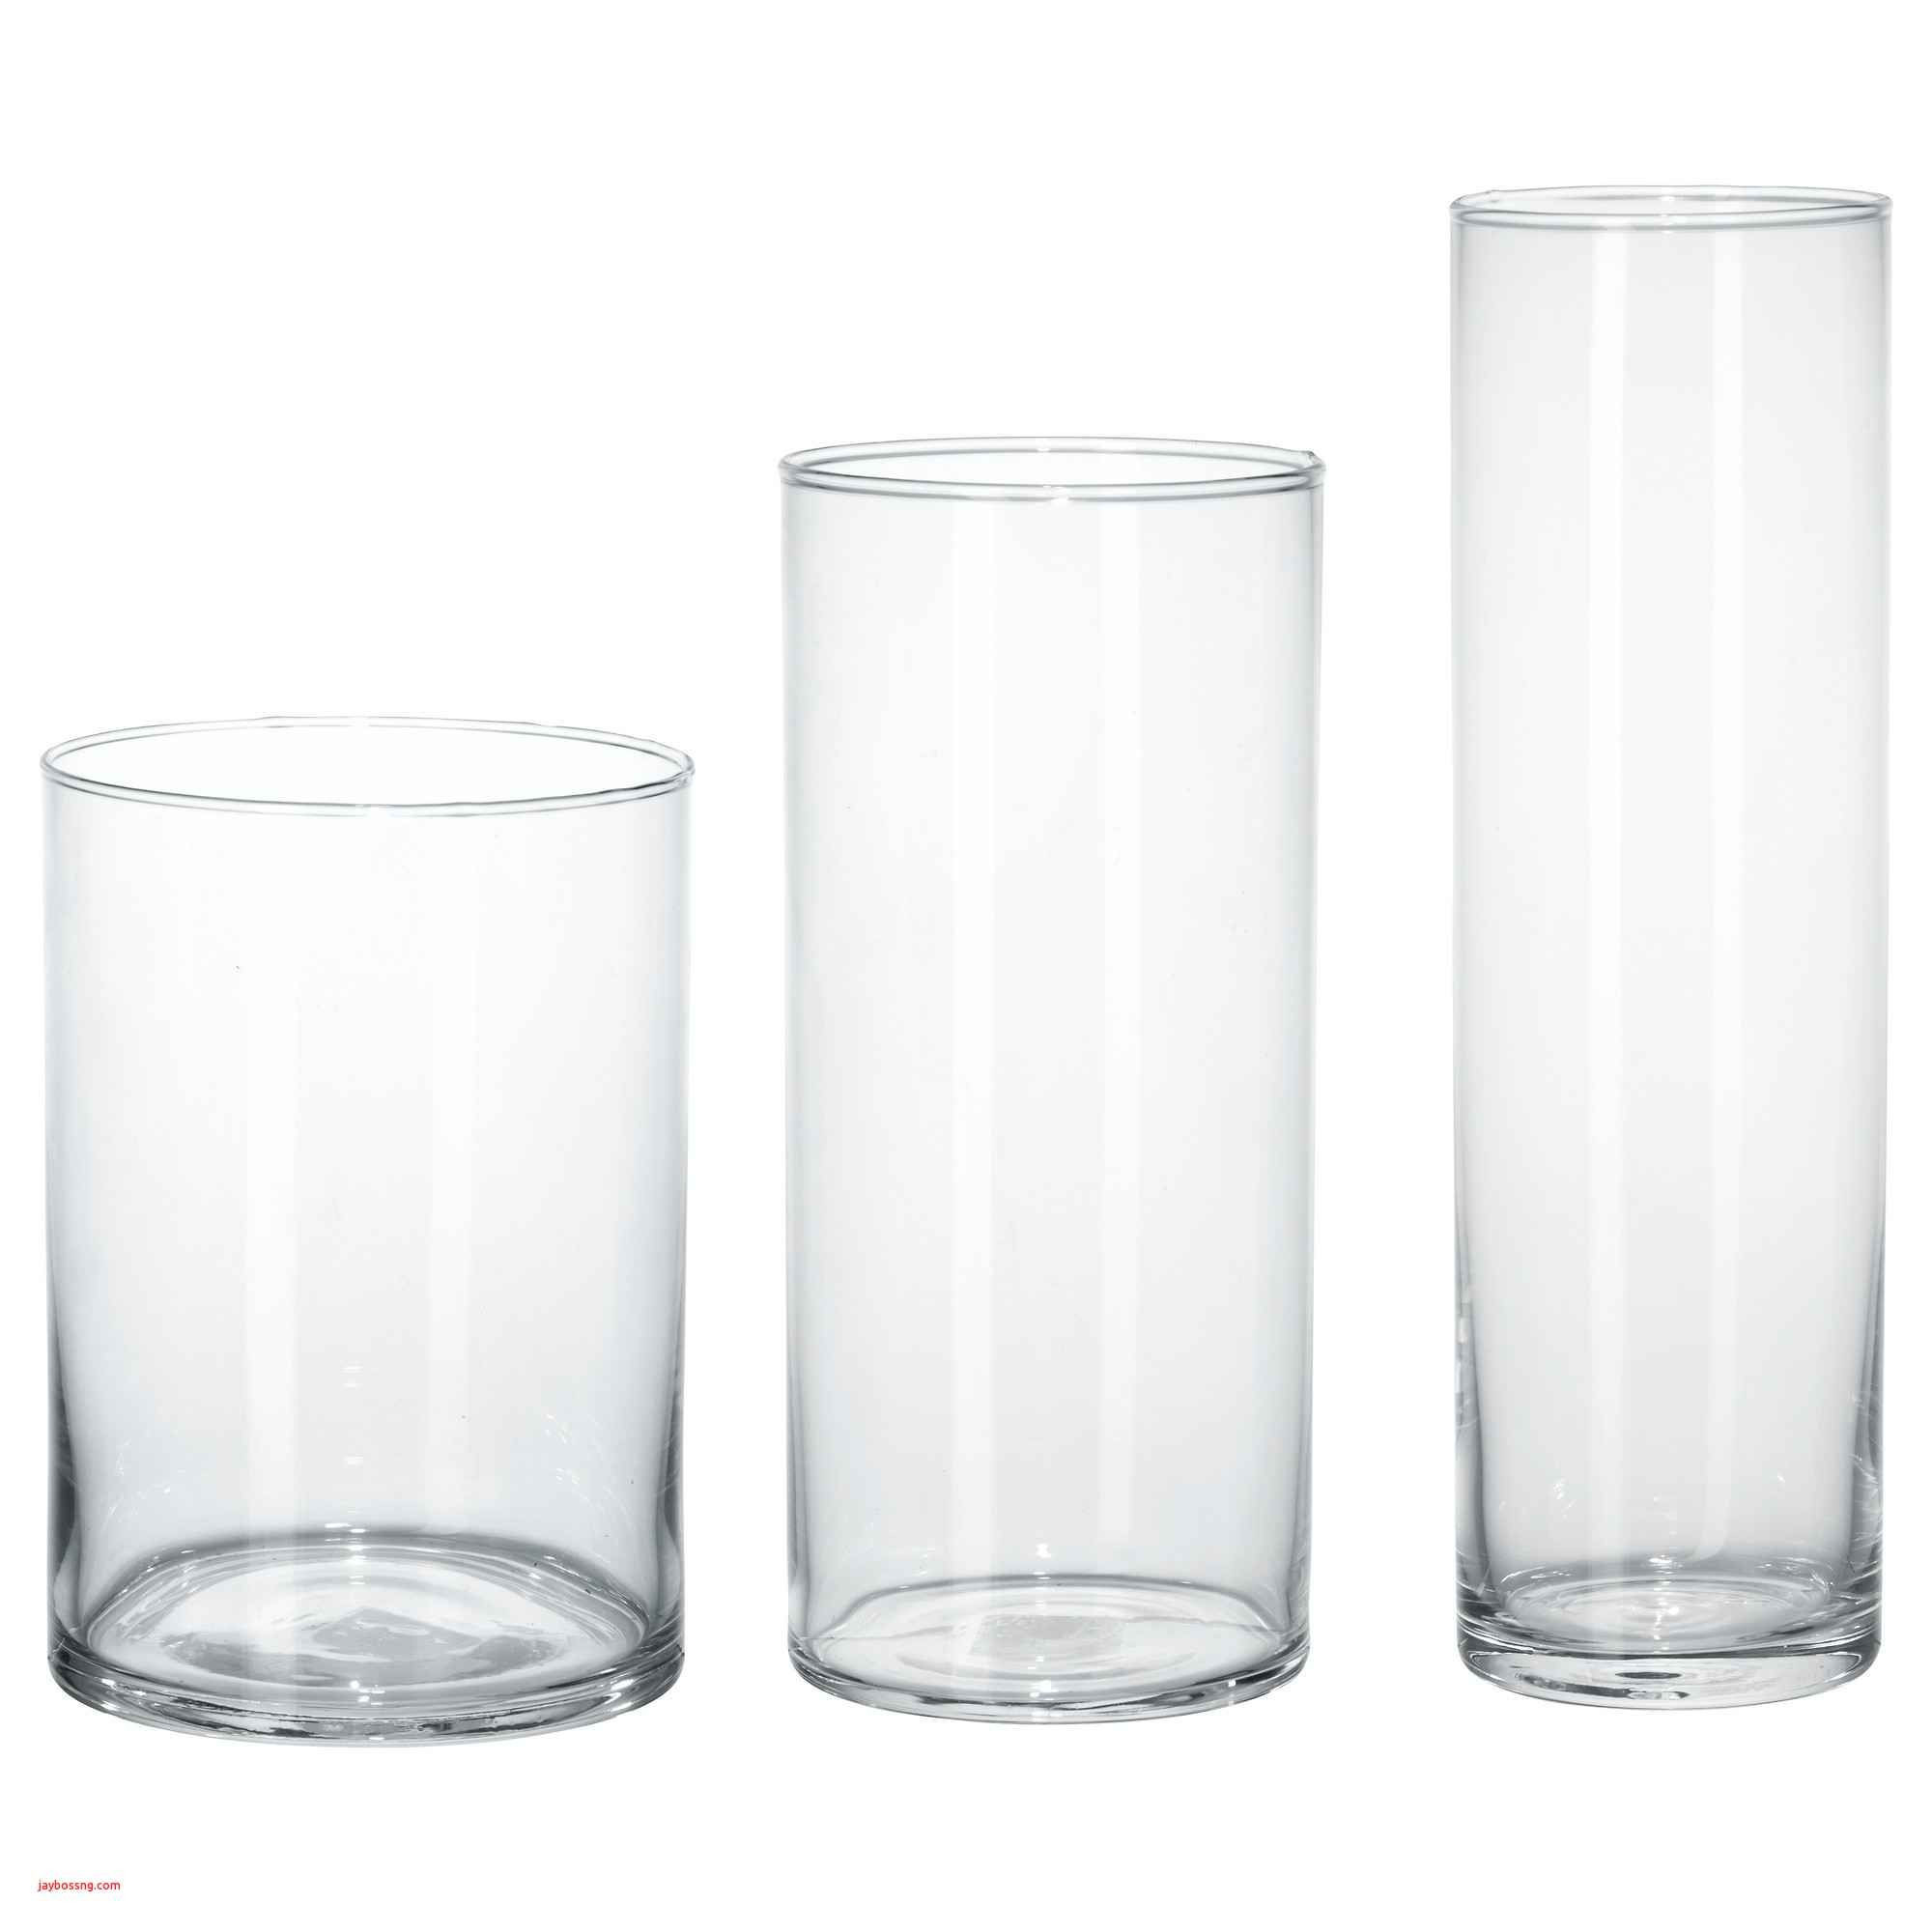 21 Unique 6 Glass Cylinder Vase 2024 free download 6 glass cylinder vase of brown glass vase fresh ikea white table created pe s5h vases ikea in brown glass vase fresh ikea white table created pe s5h vases ikea vase i 0d bladet